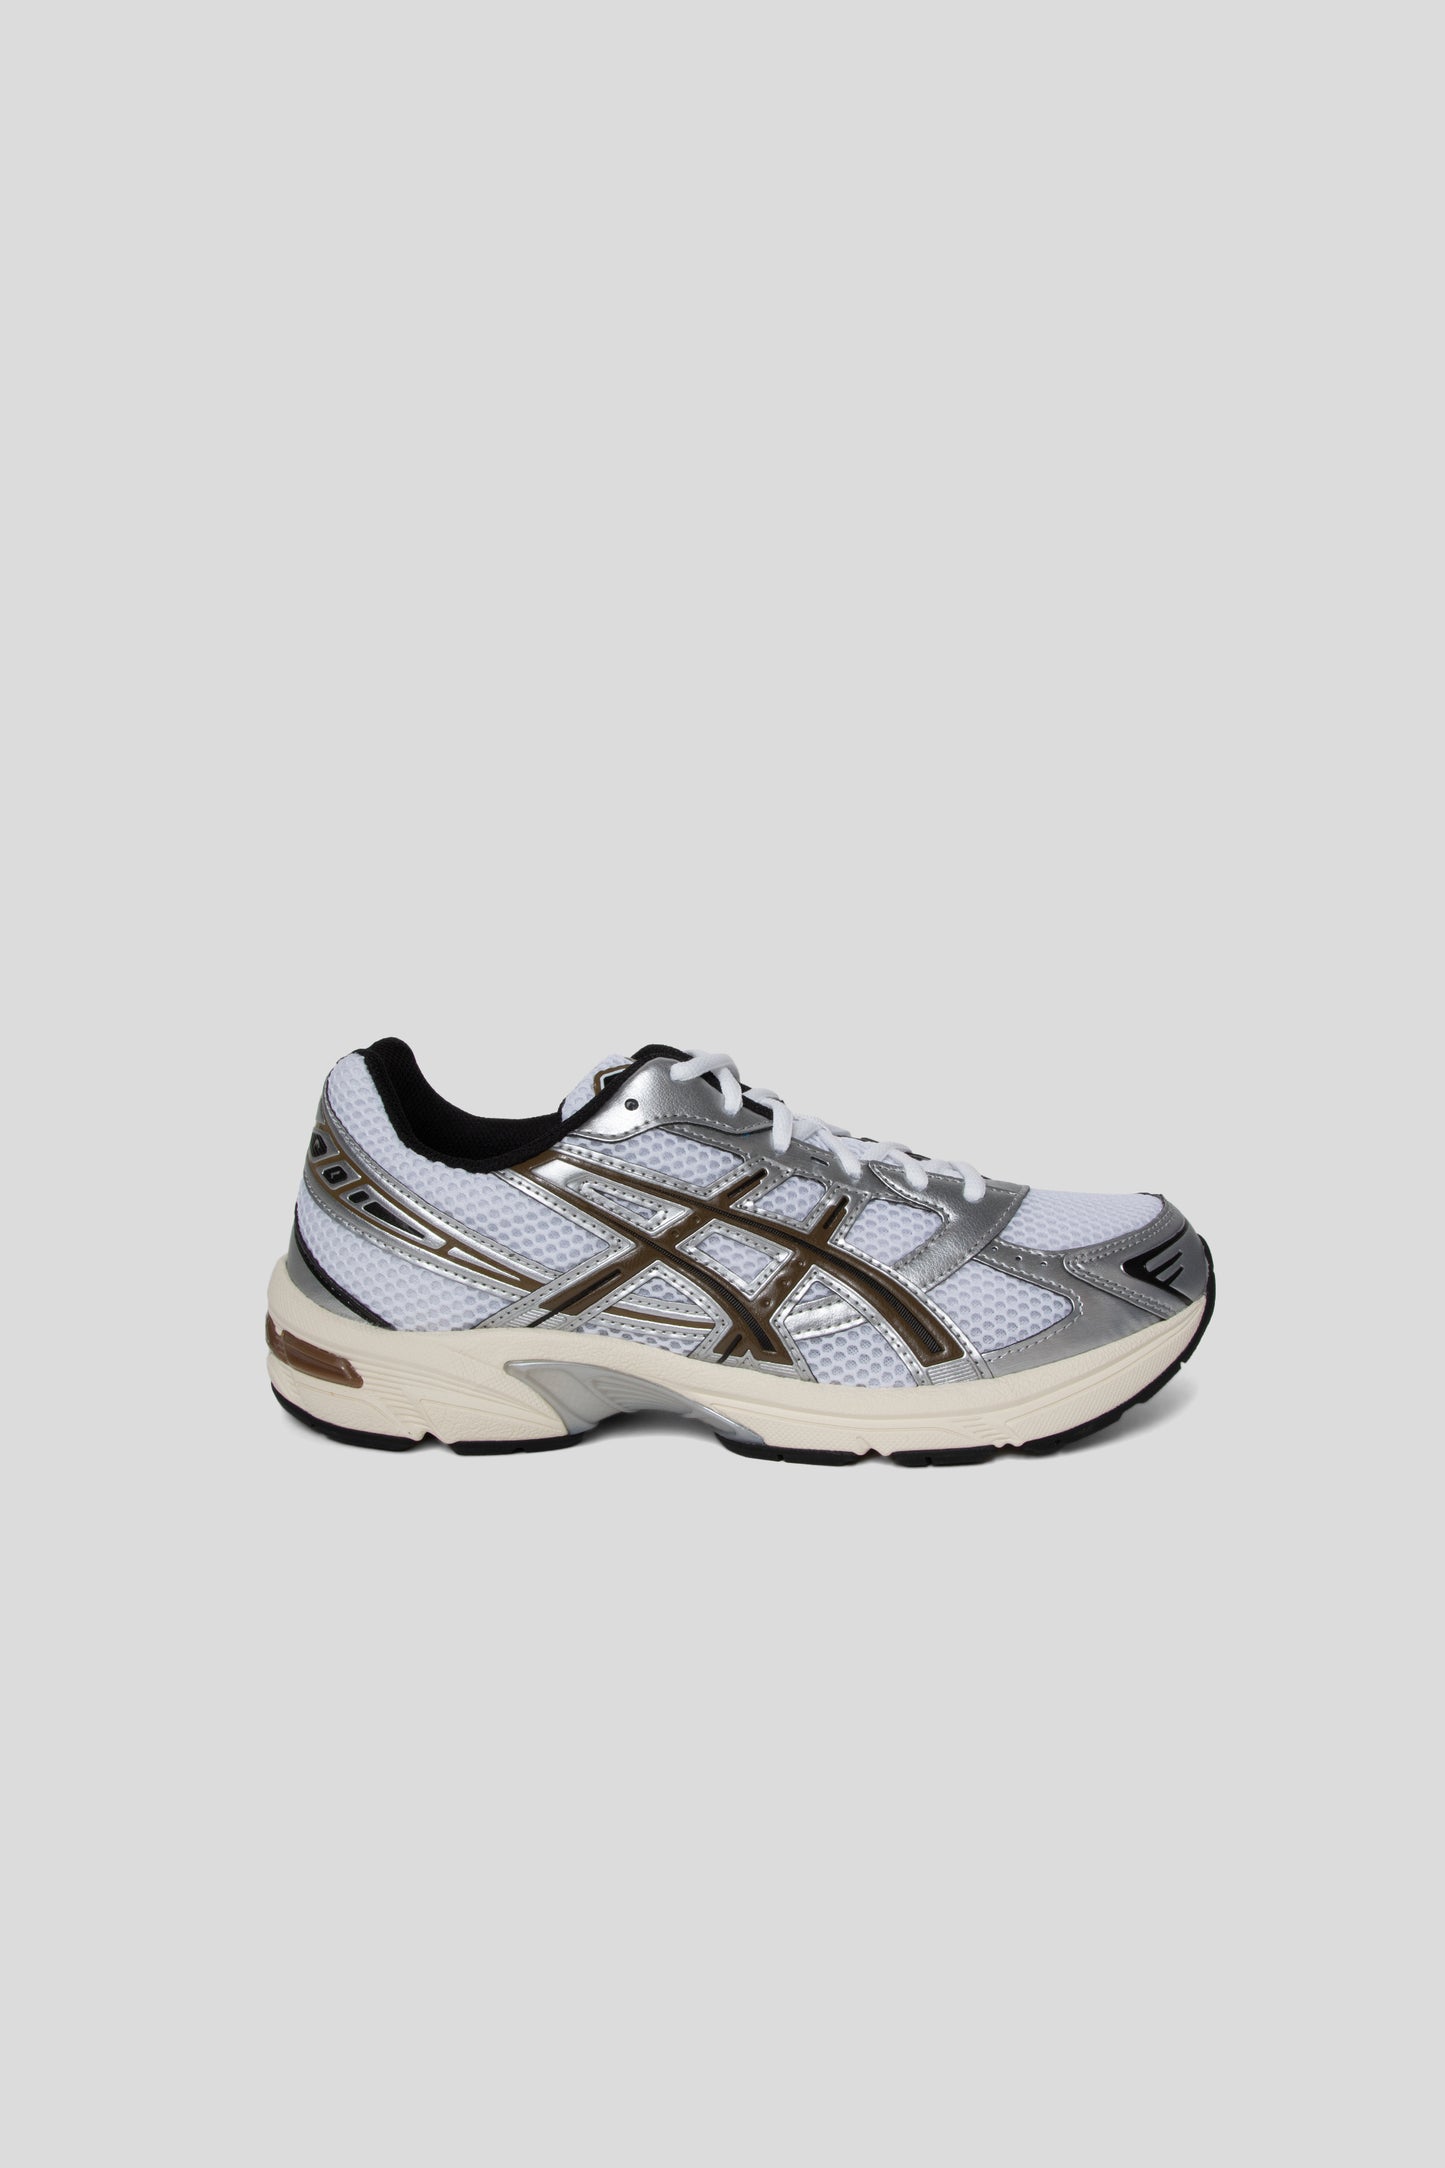 Asics Gel-1130 Shoe in White and Clay Canyon